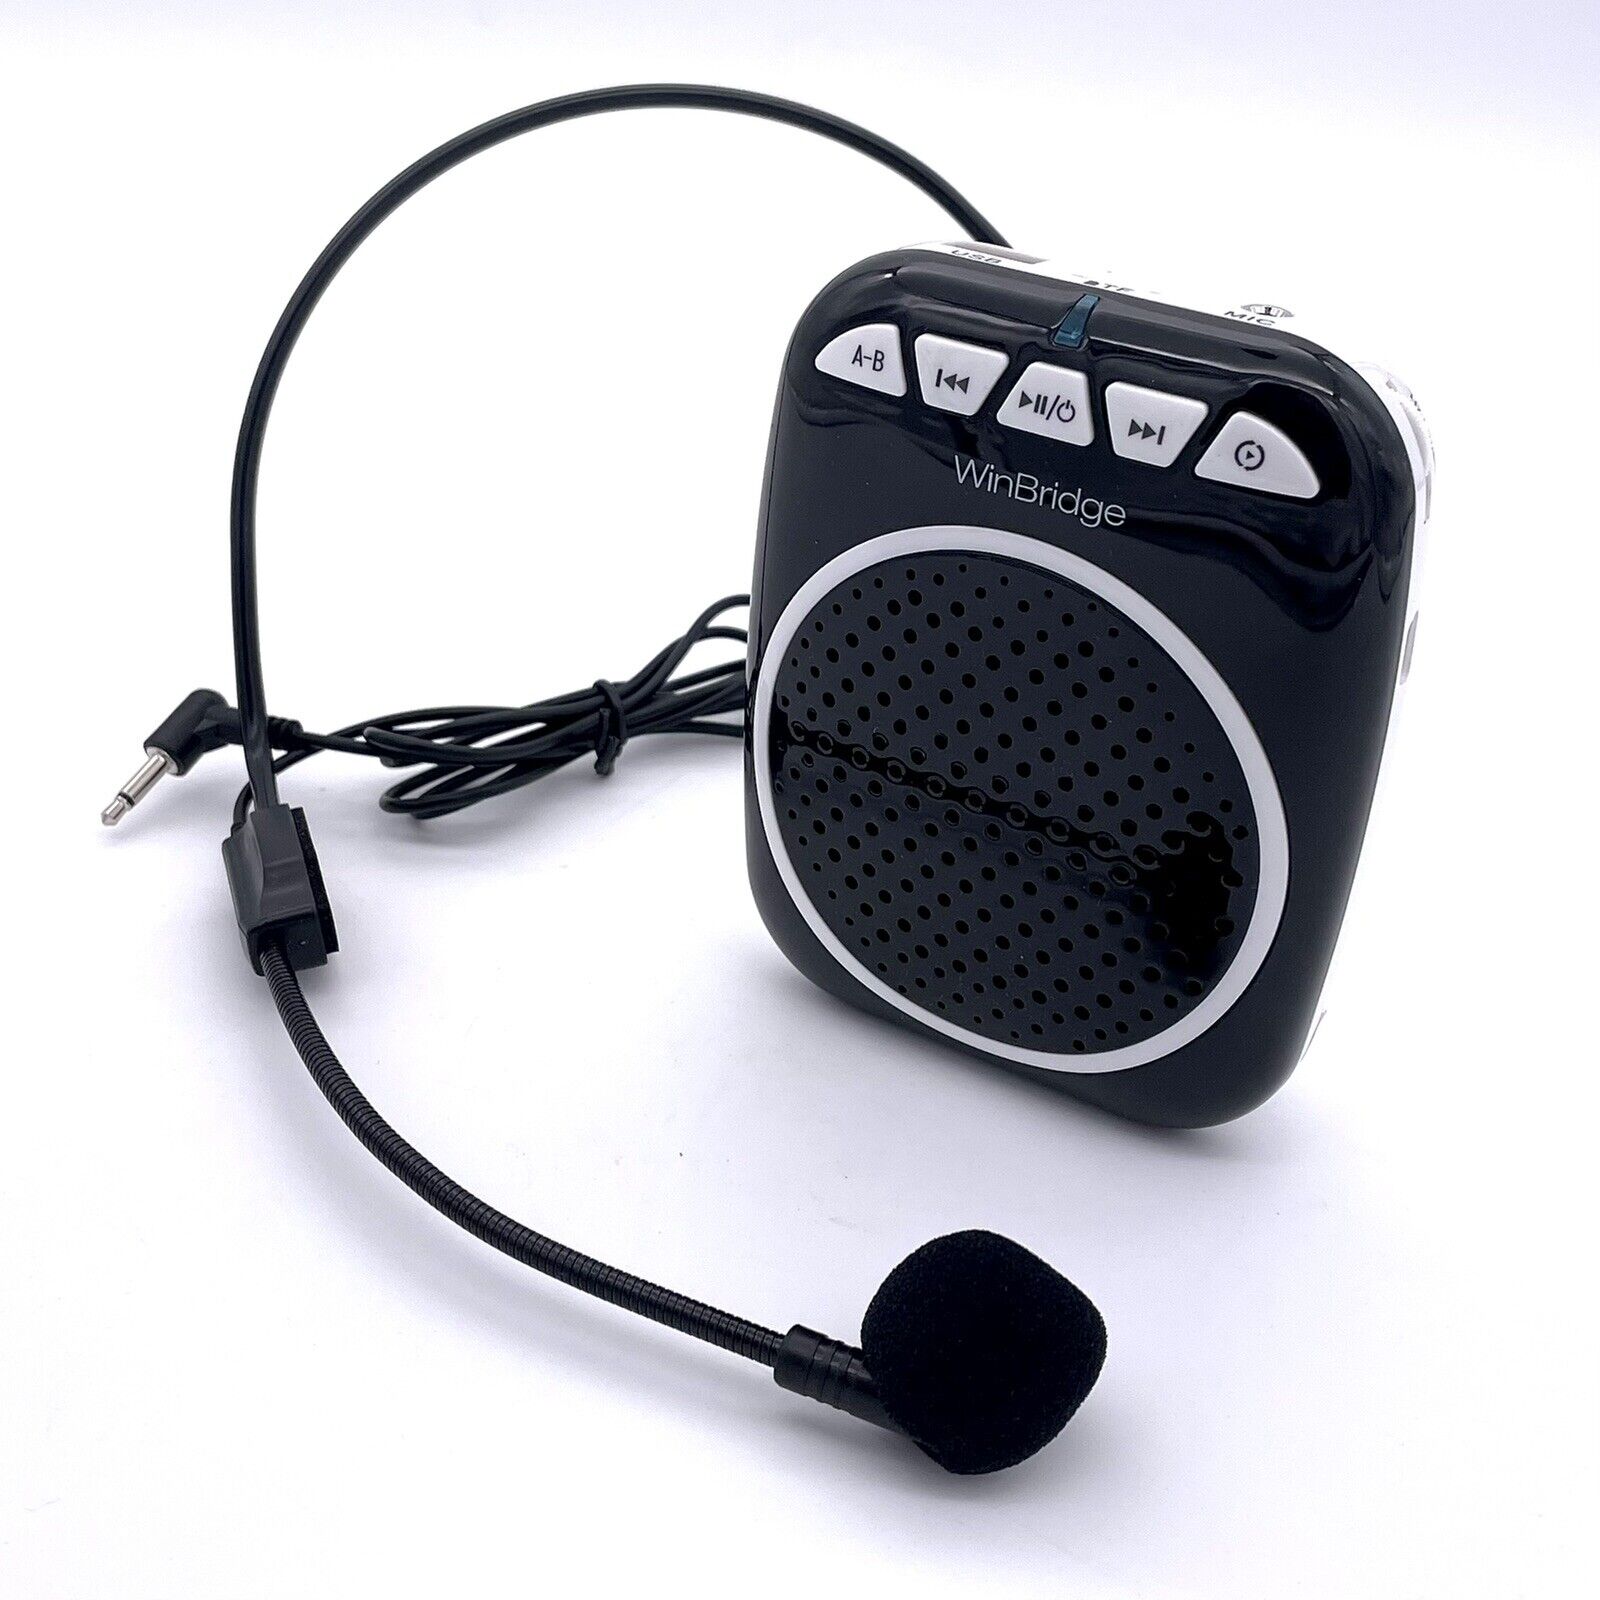 WinBridge Complete Free Max 87% OFF Shipping Portable Voice Amplifier Microphone Headset Perso with